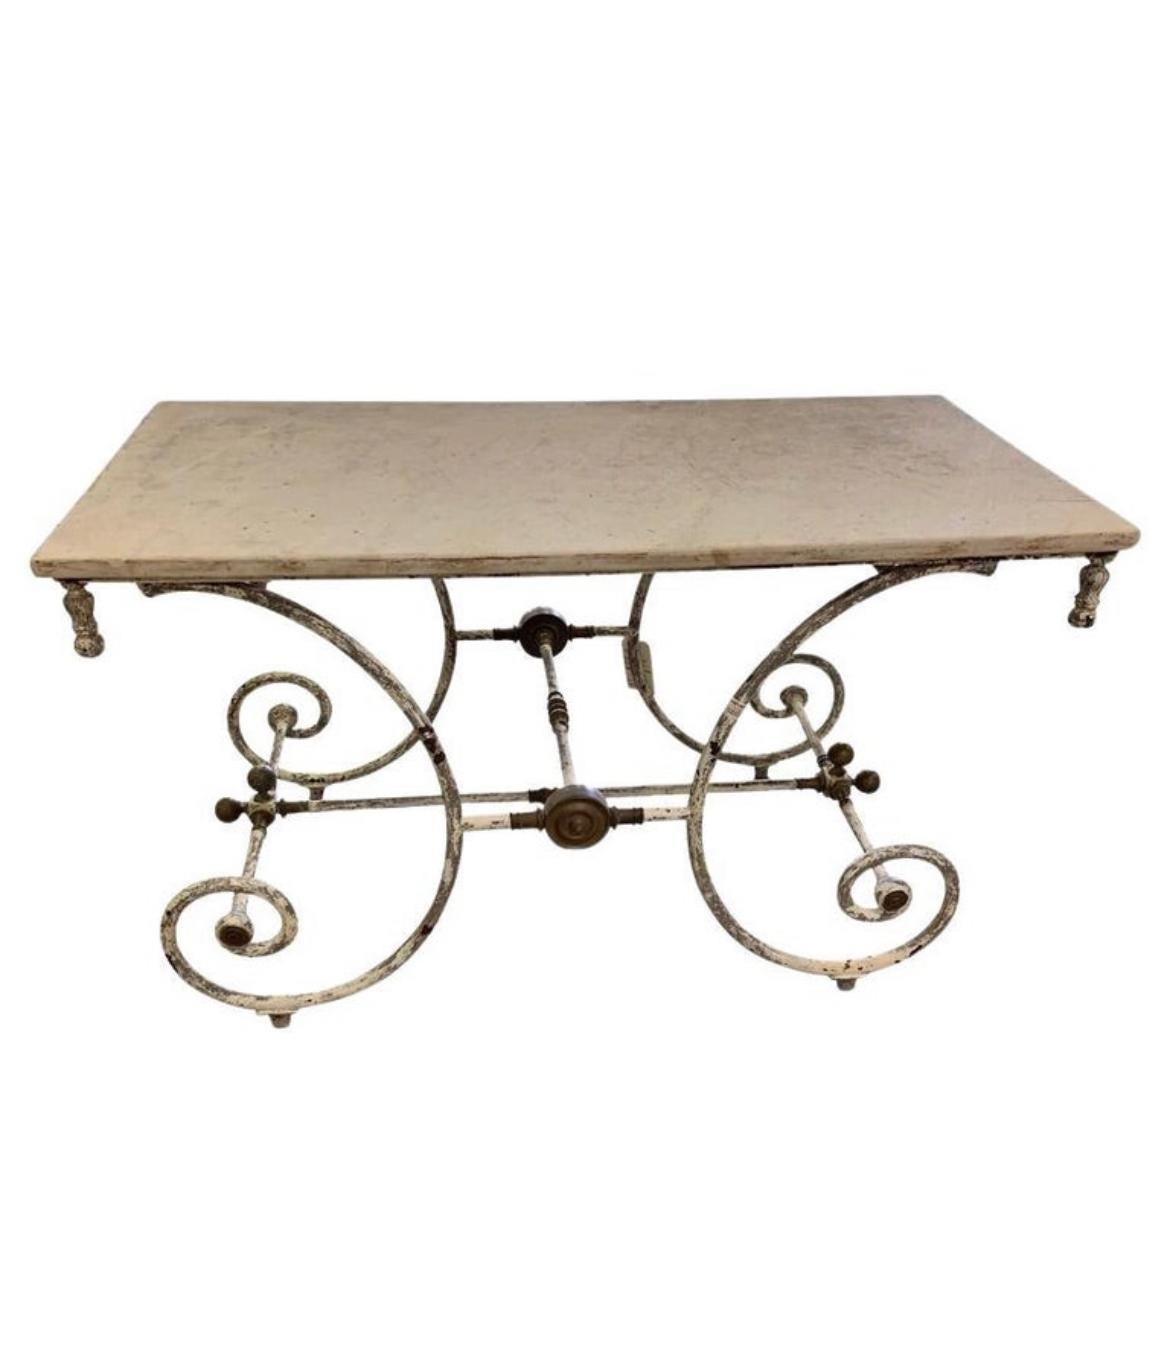 A gorgeous 19th century French marble top pastry table featuring old white painted patina on the iron base. This beauty features decorative brass hardware with patina and a white veined marble top. Ideal for use as a kitchen island or could also